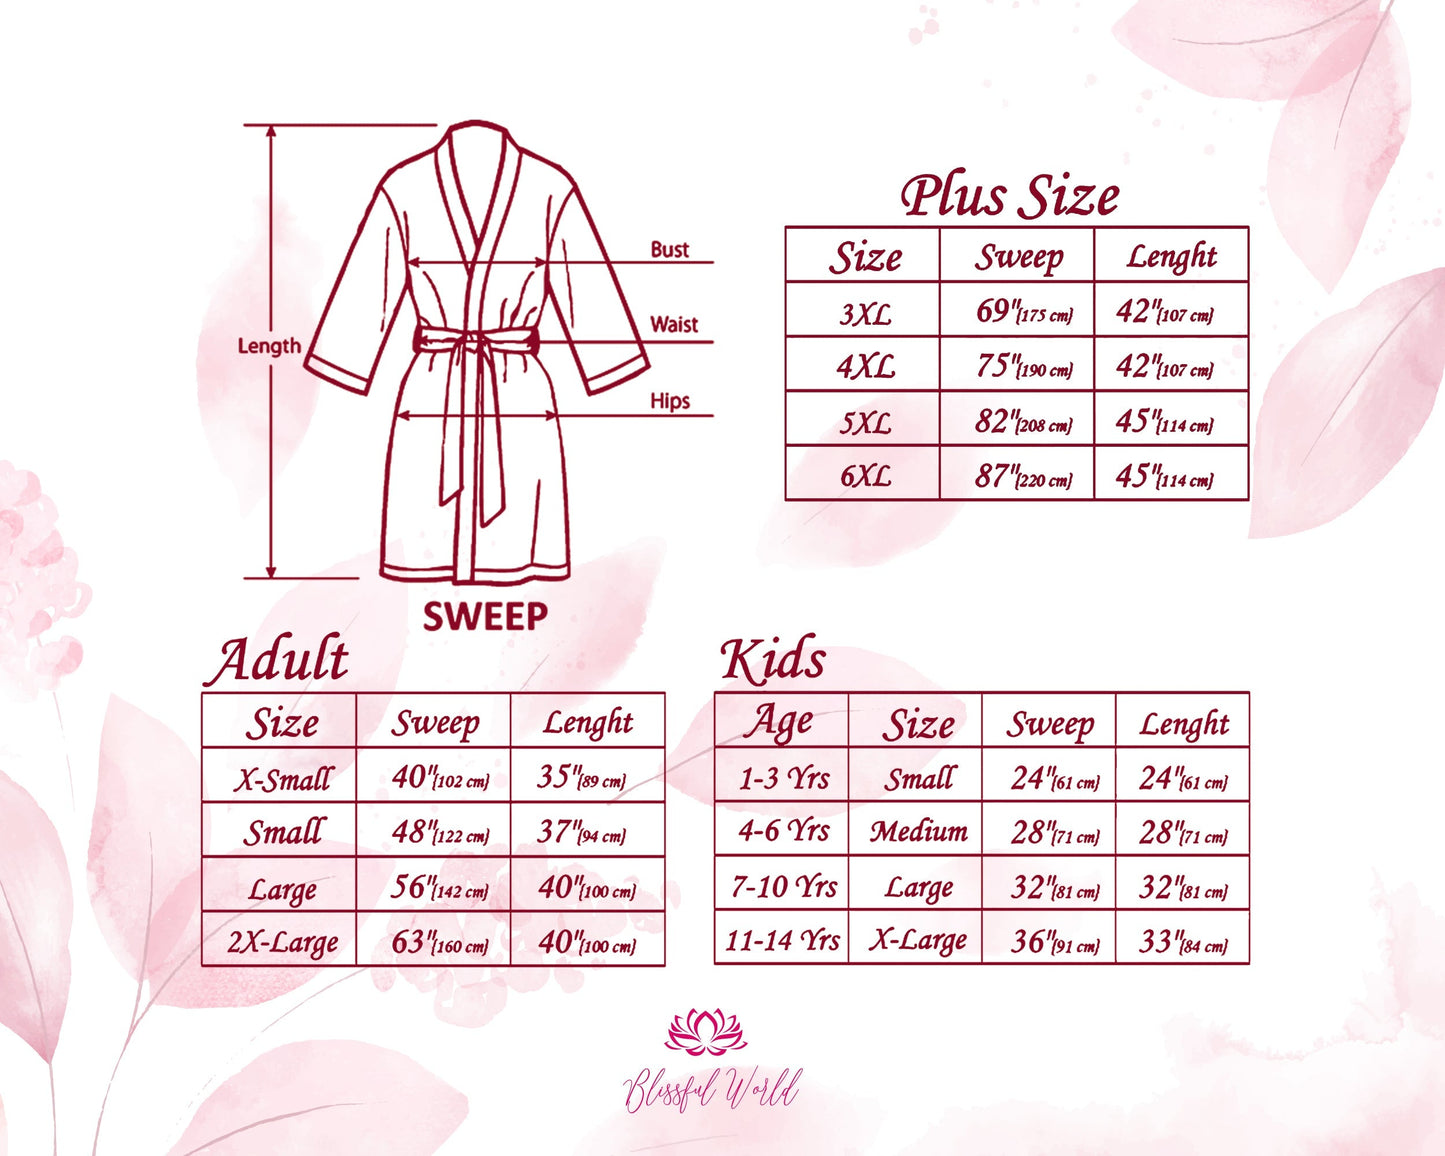 Custom Robes Satin Robes Personalized Robes Customized Satin Robes Wedding Robes Custom Satin Robes Custom Bridesmaid Robe Bridal Satin Robe